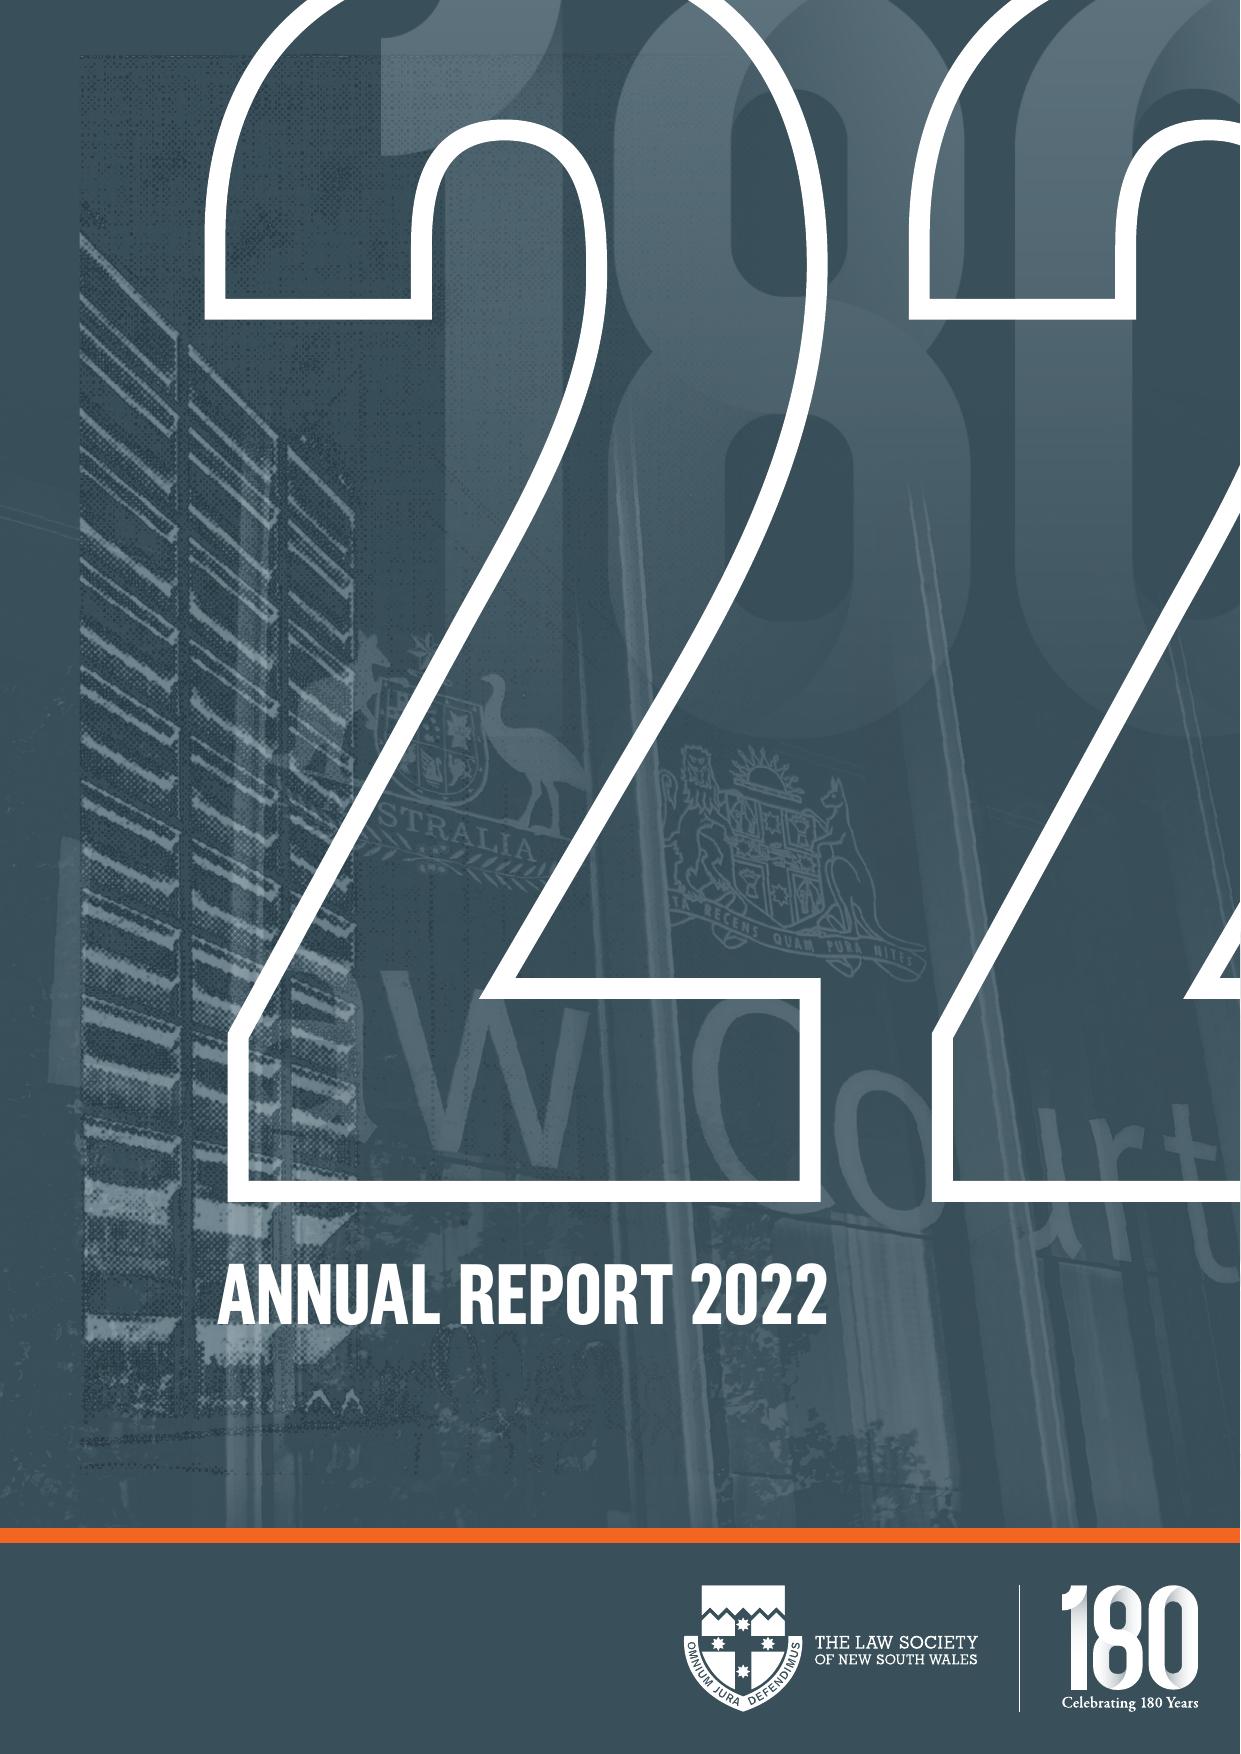 LAWSOCIETY 2023 Annual Report